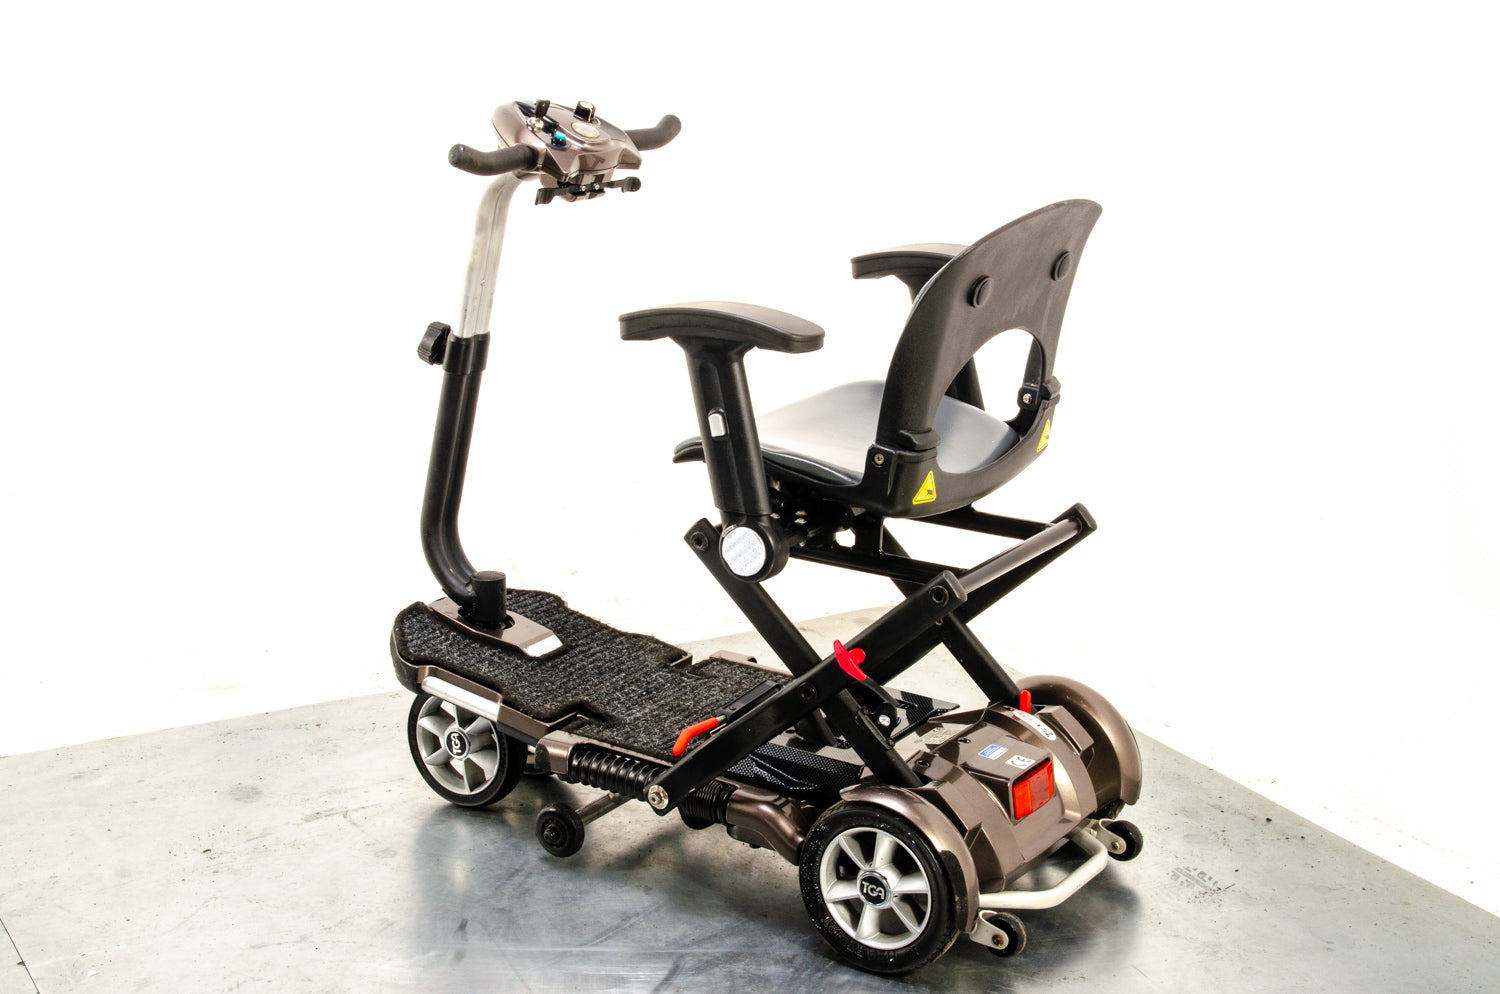 TGA Minimo Used Mobility Scooter Small Compact Folding Travel Lithium Battery Lightweight 13442